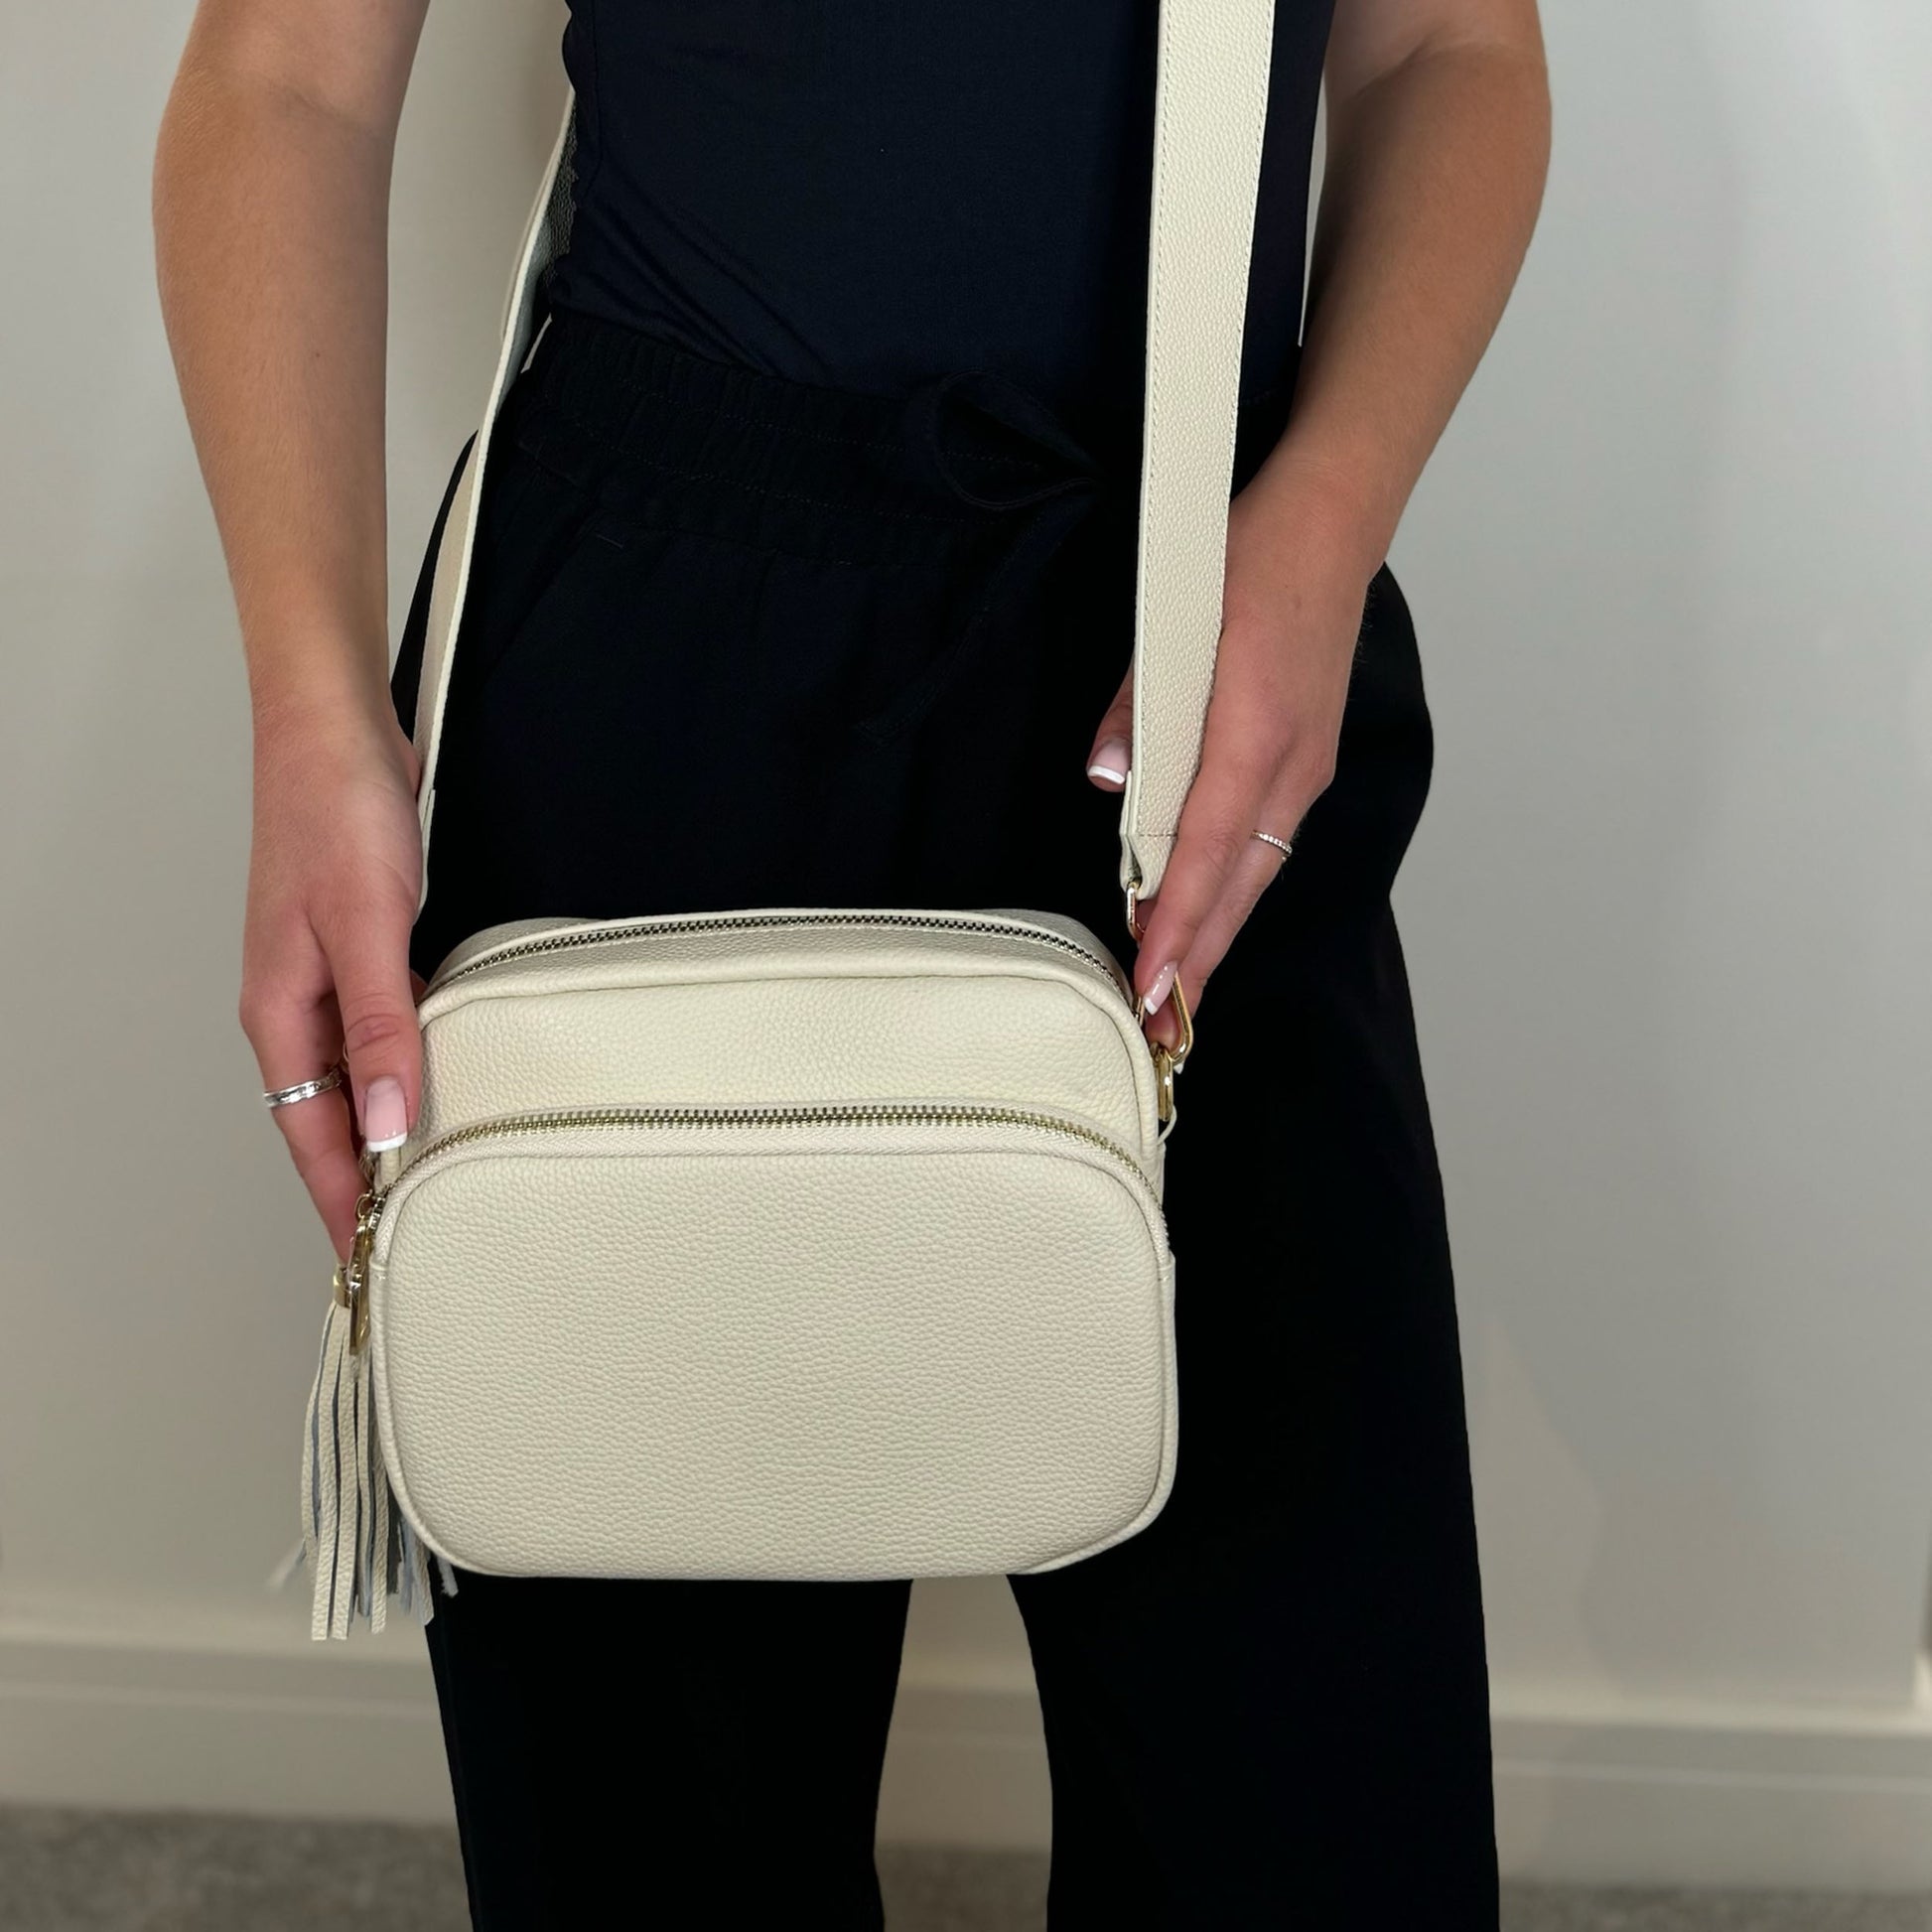 Off White Swoon London Downton Bag on Person